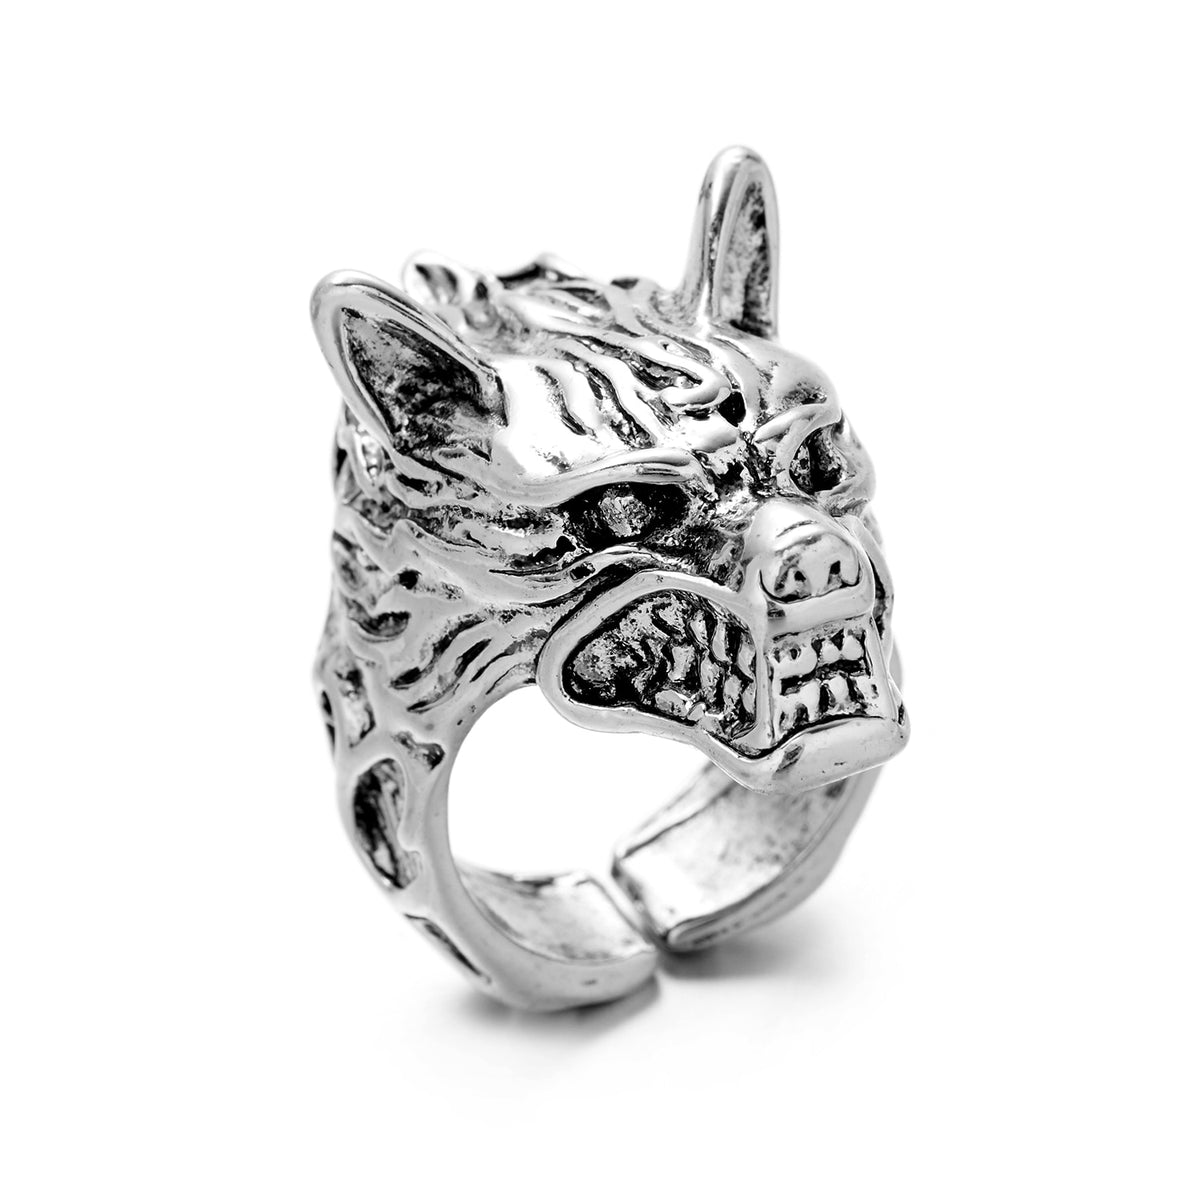 Vintage Silver Plated Adjustable Rings For Women Men Gothic Punk Wolf Angel Wing Starfish Open Finger Ring Party Jewelry Gift